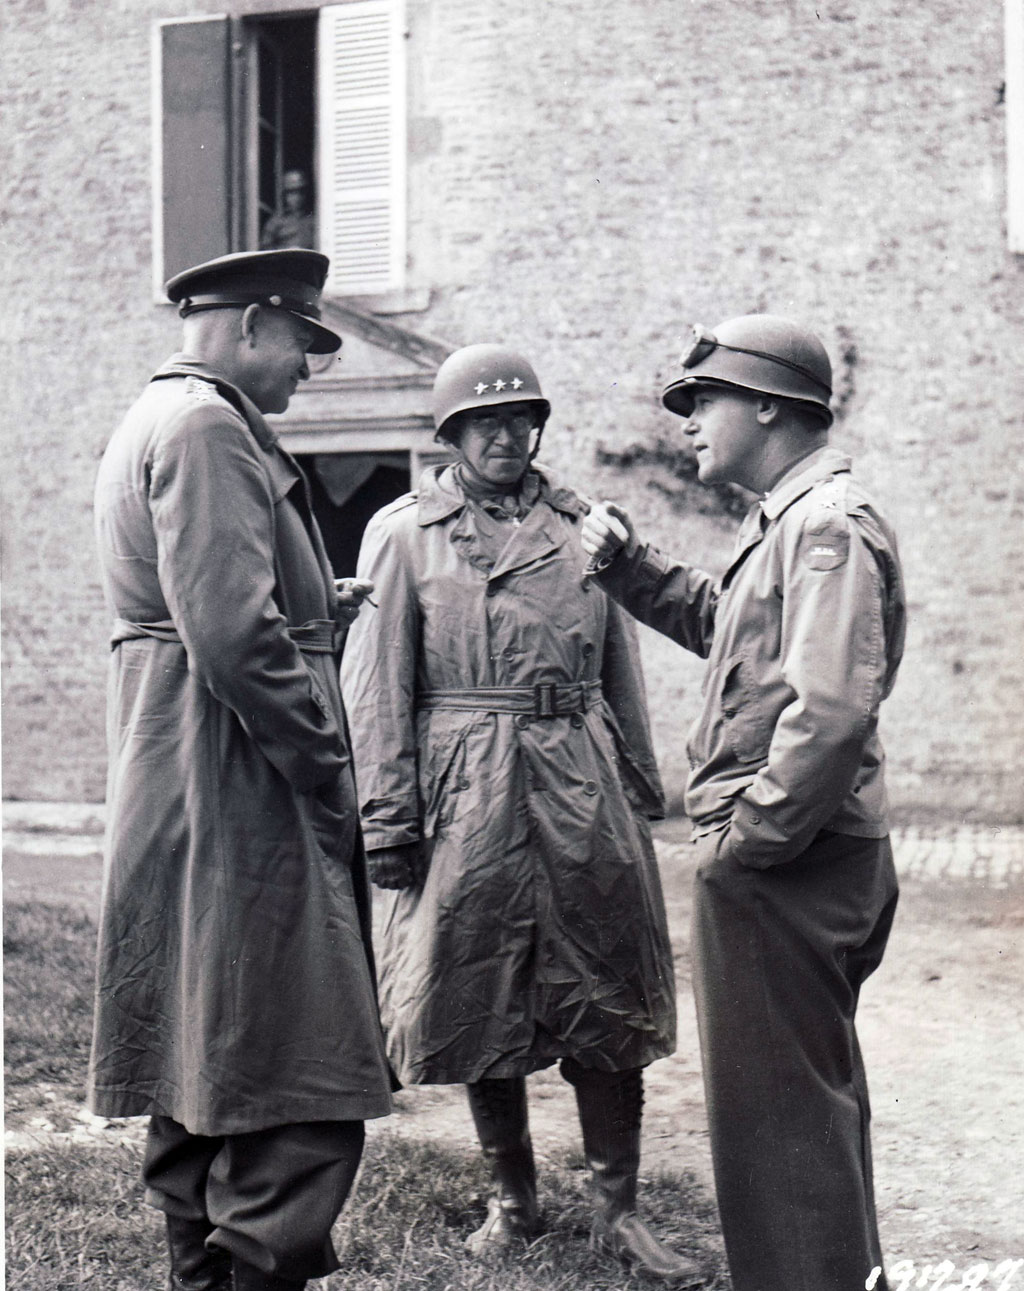 Eisenhower and Bradley listen to Major General J. Lawton Collins, right, commander of the U.S. VII Corps, shortly after the capture of Cherbourg.